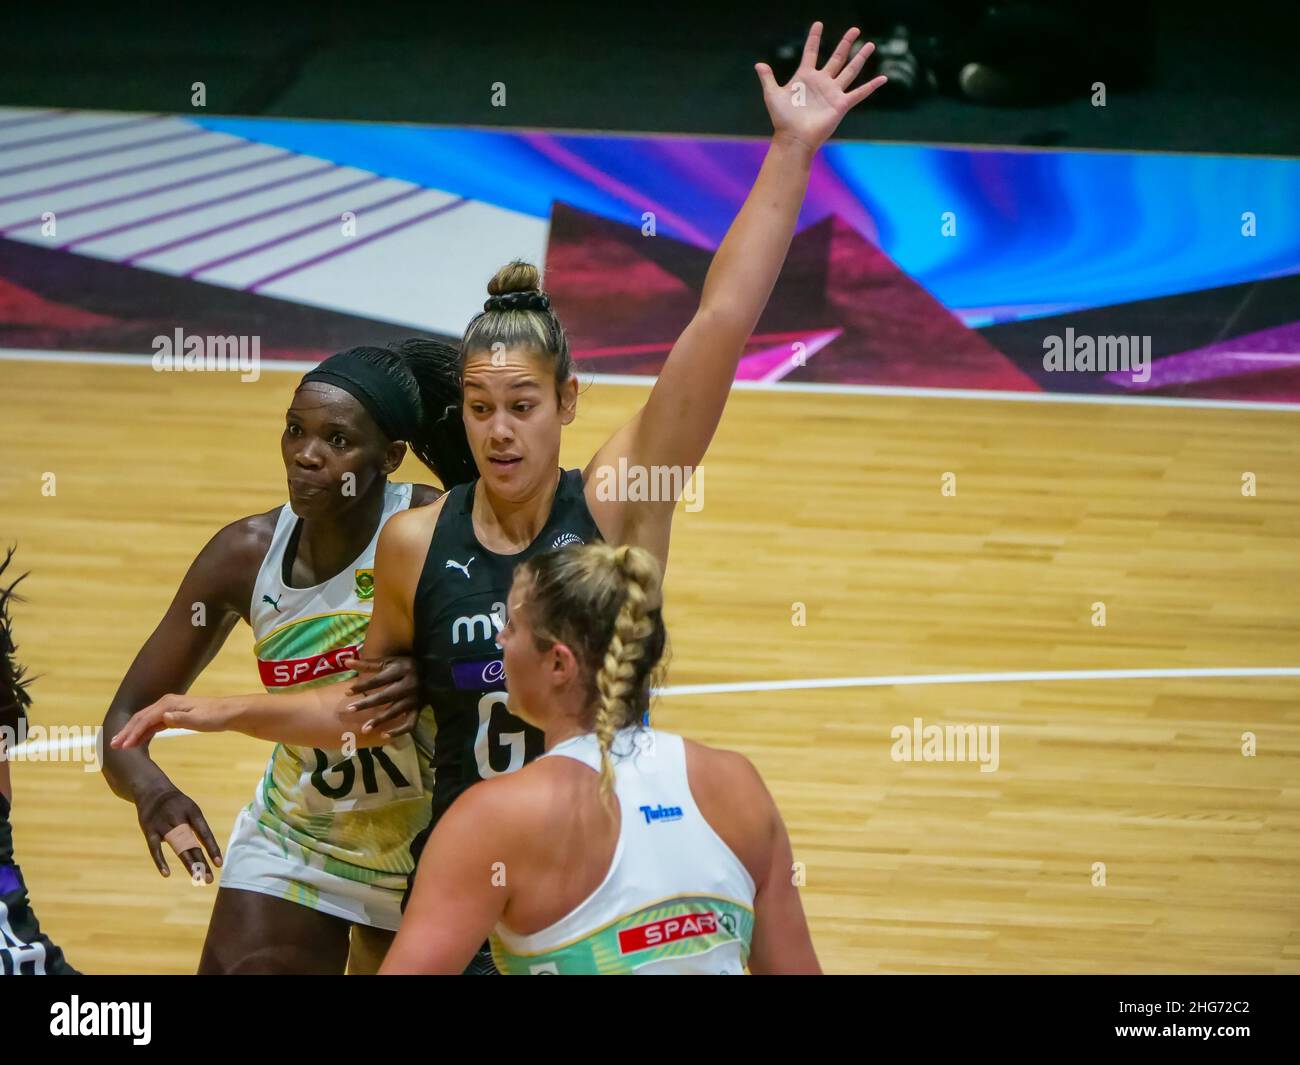 London, UK. 18th Jan, 2022. Copper Box Arena, London, 18th January 2022 Maia Wilson (GA - New Zealand Silver Ferns) calls for the ball in the match between Proteas (South Africa) and Silver Ferns (New Zealand) in the Quad Series at the Copper Box Arena, London on 18th January 2022 Claire Jeffrey/SPP Credit: SPP Sport Press Photo. /Alamy Live News Stock Photo